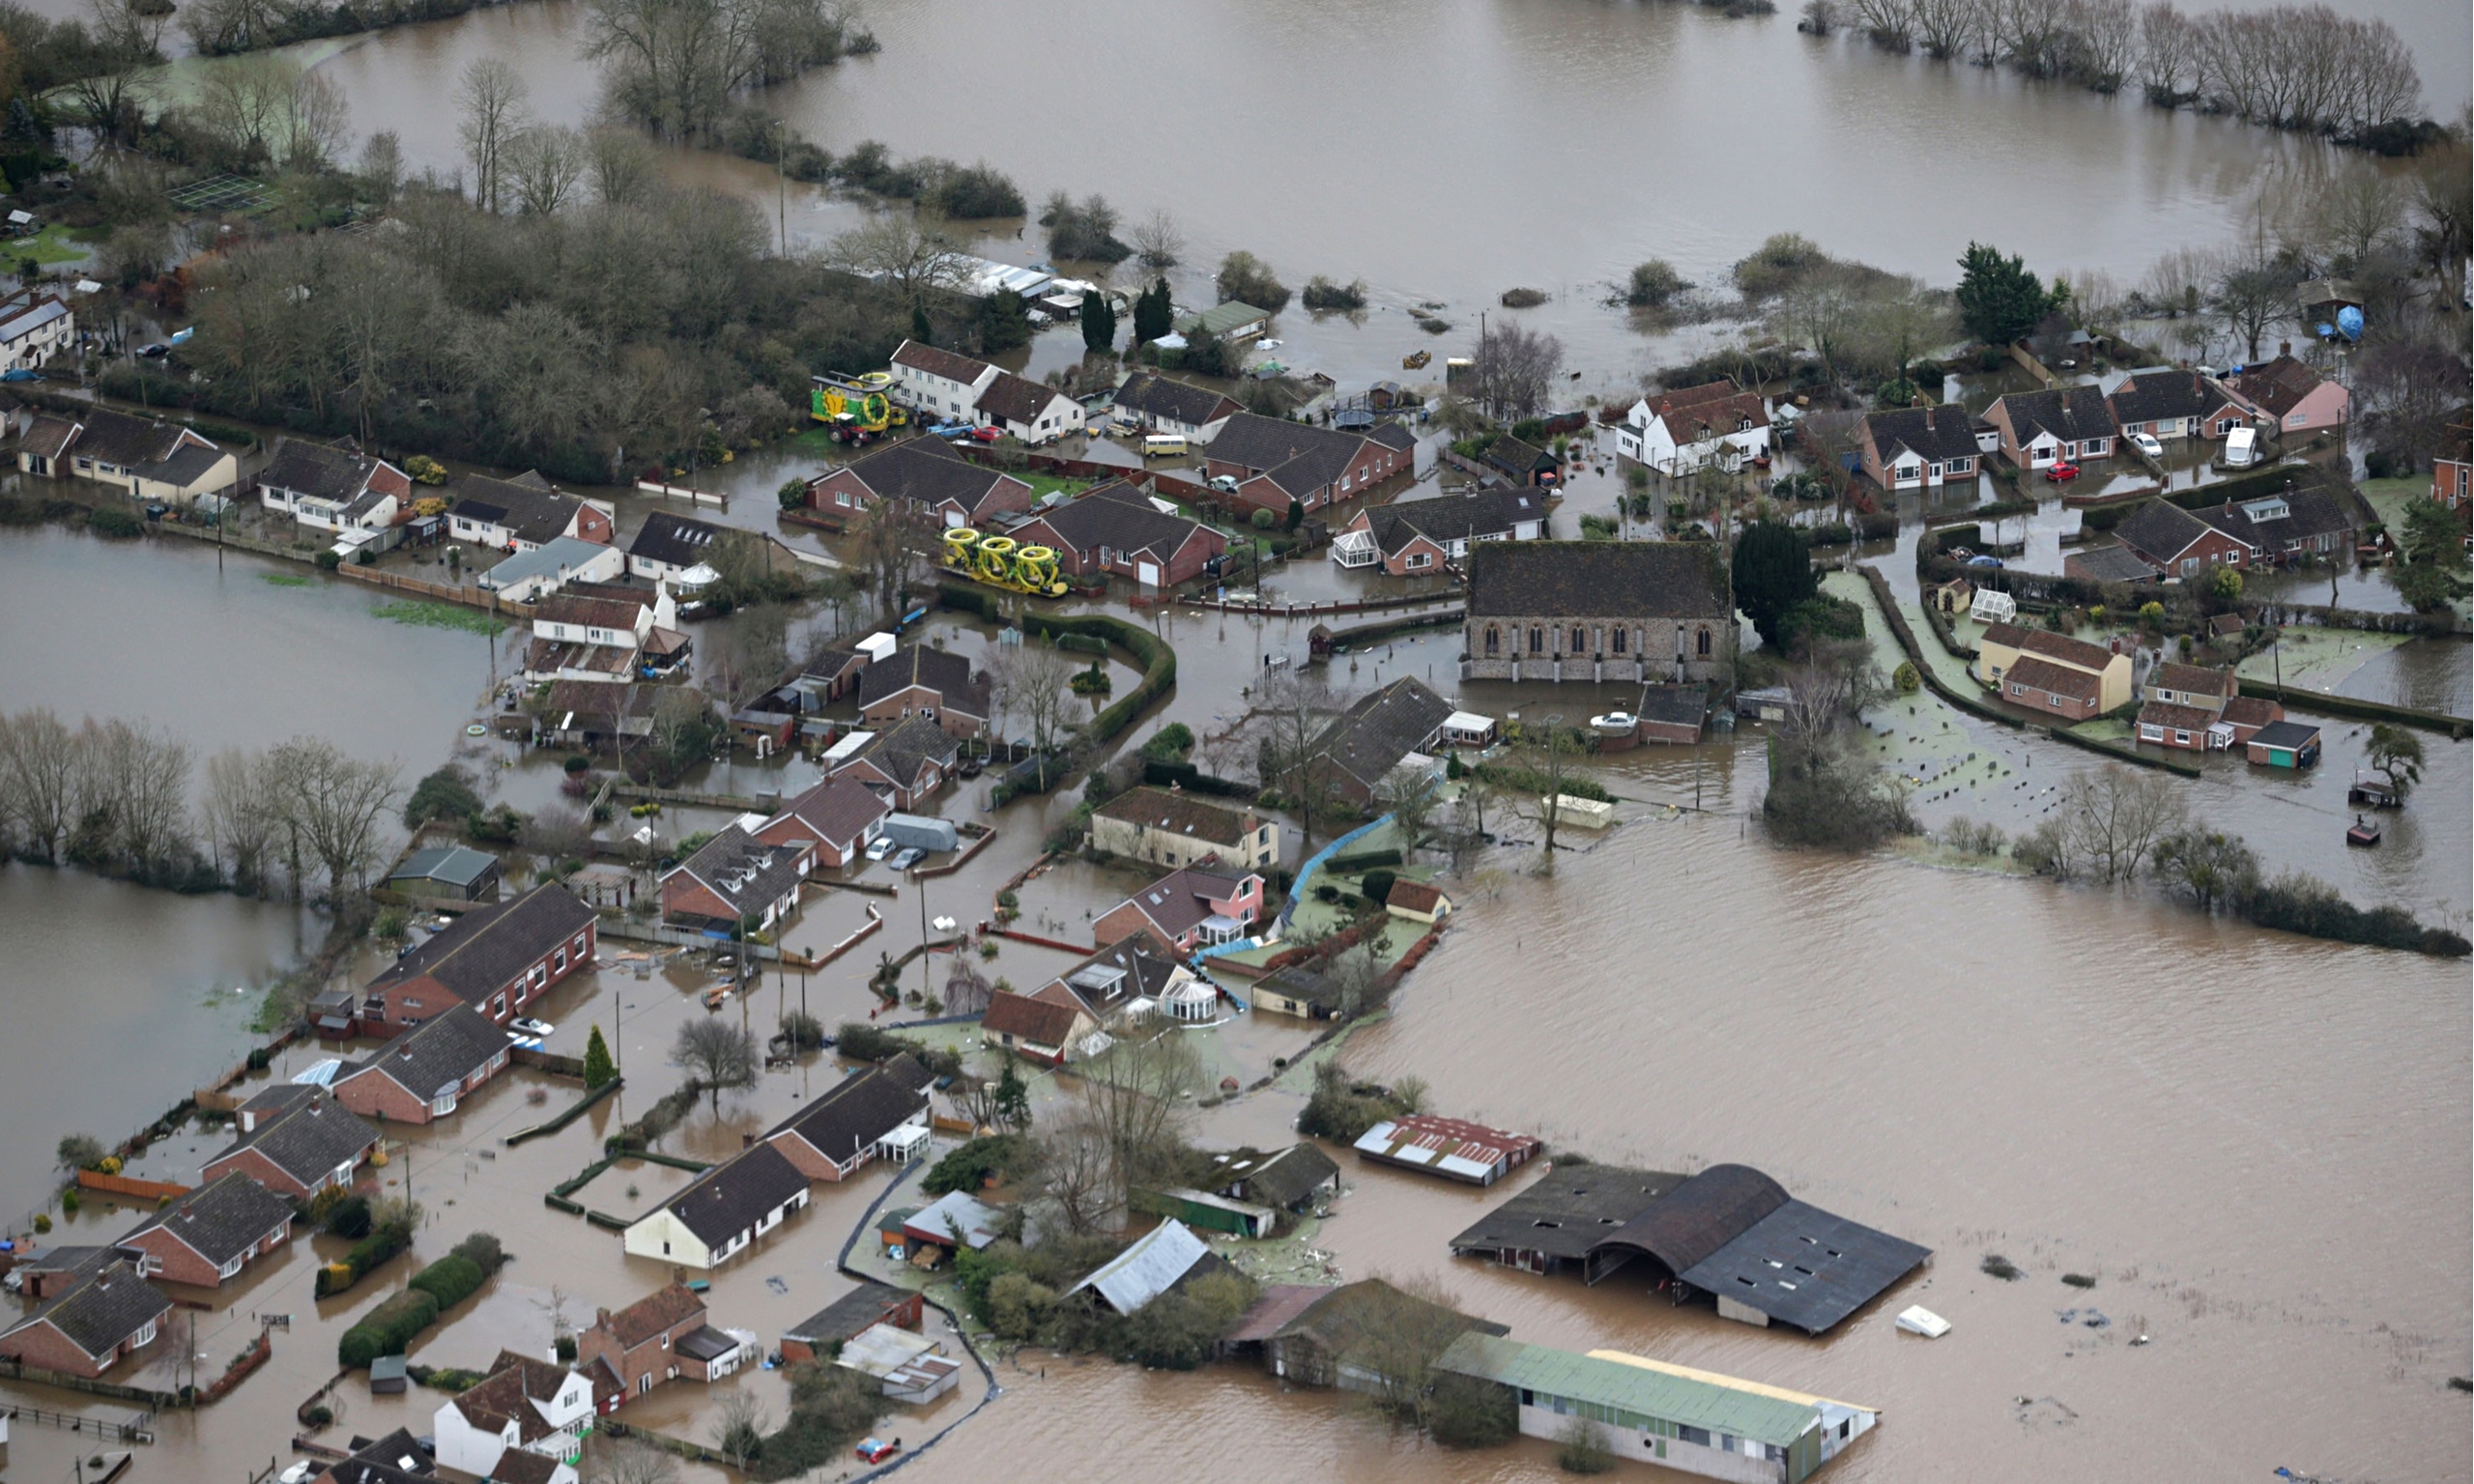 2014 Floods England: source The Guardien at https://static-secure.guim.co.uk/sys-images/Guardian/Pix/pictures/2014/2/13/1392322923647/Flooding-on-Somerset-Leve-014.jpg